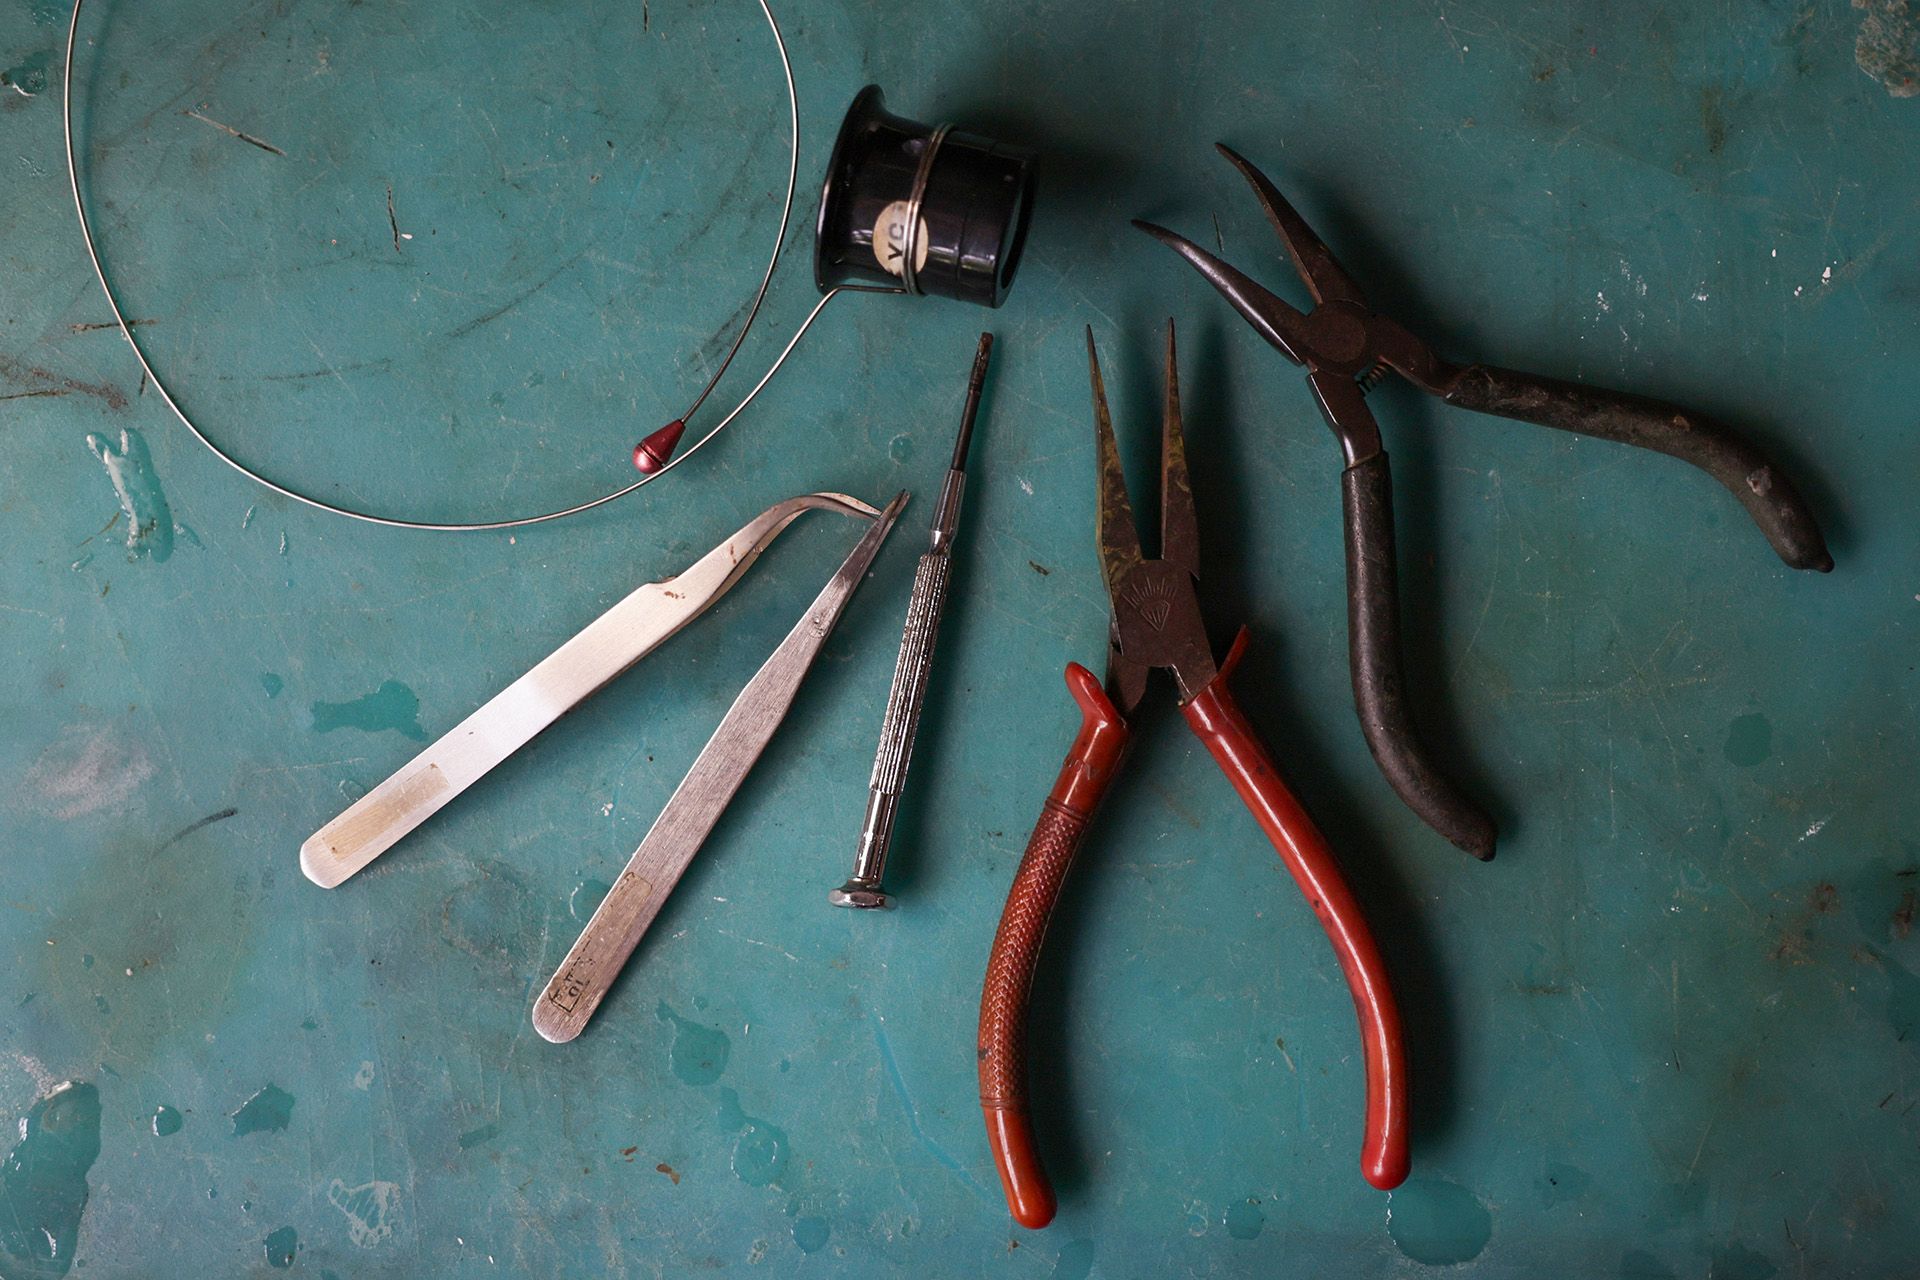 Mr Mun’s tools include the loupe, tweezers, screwdriver and pliers.